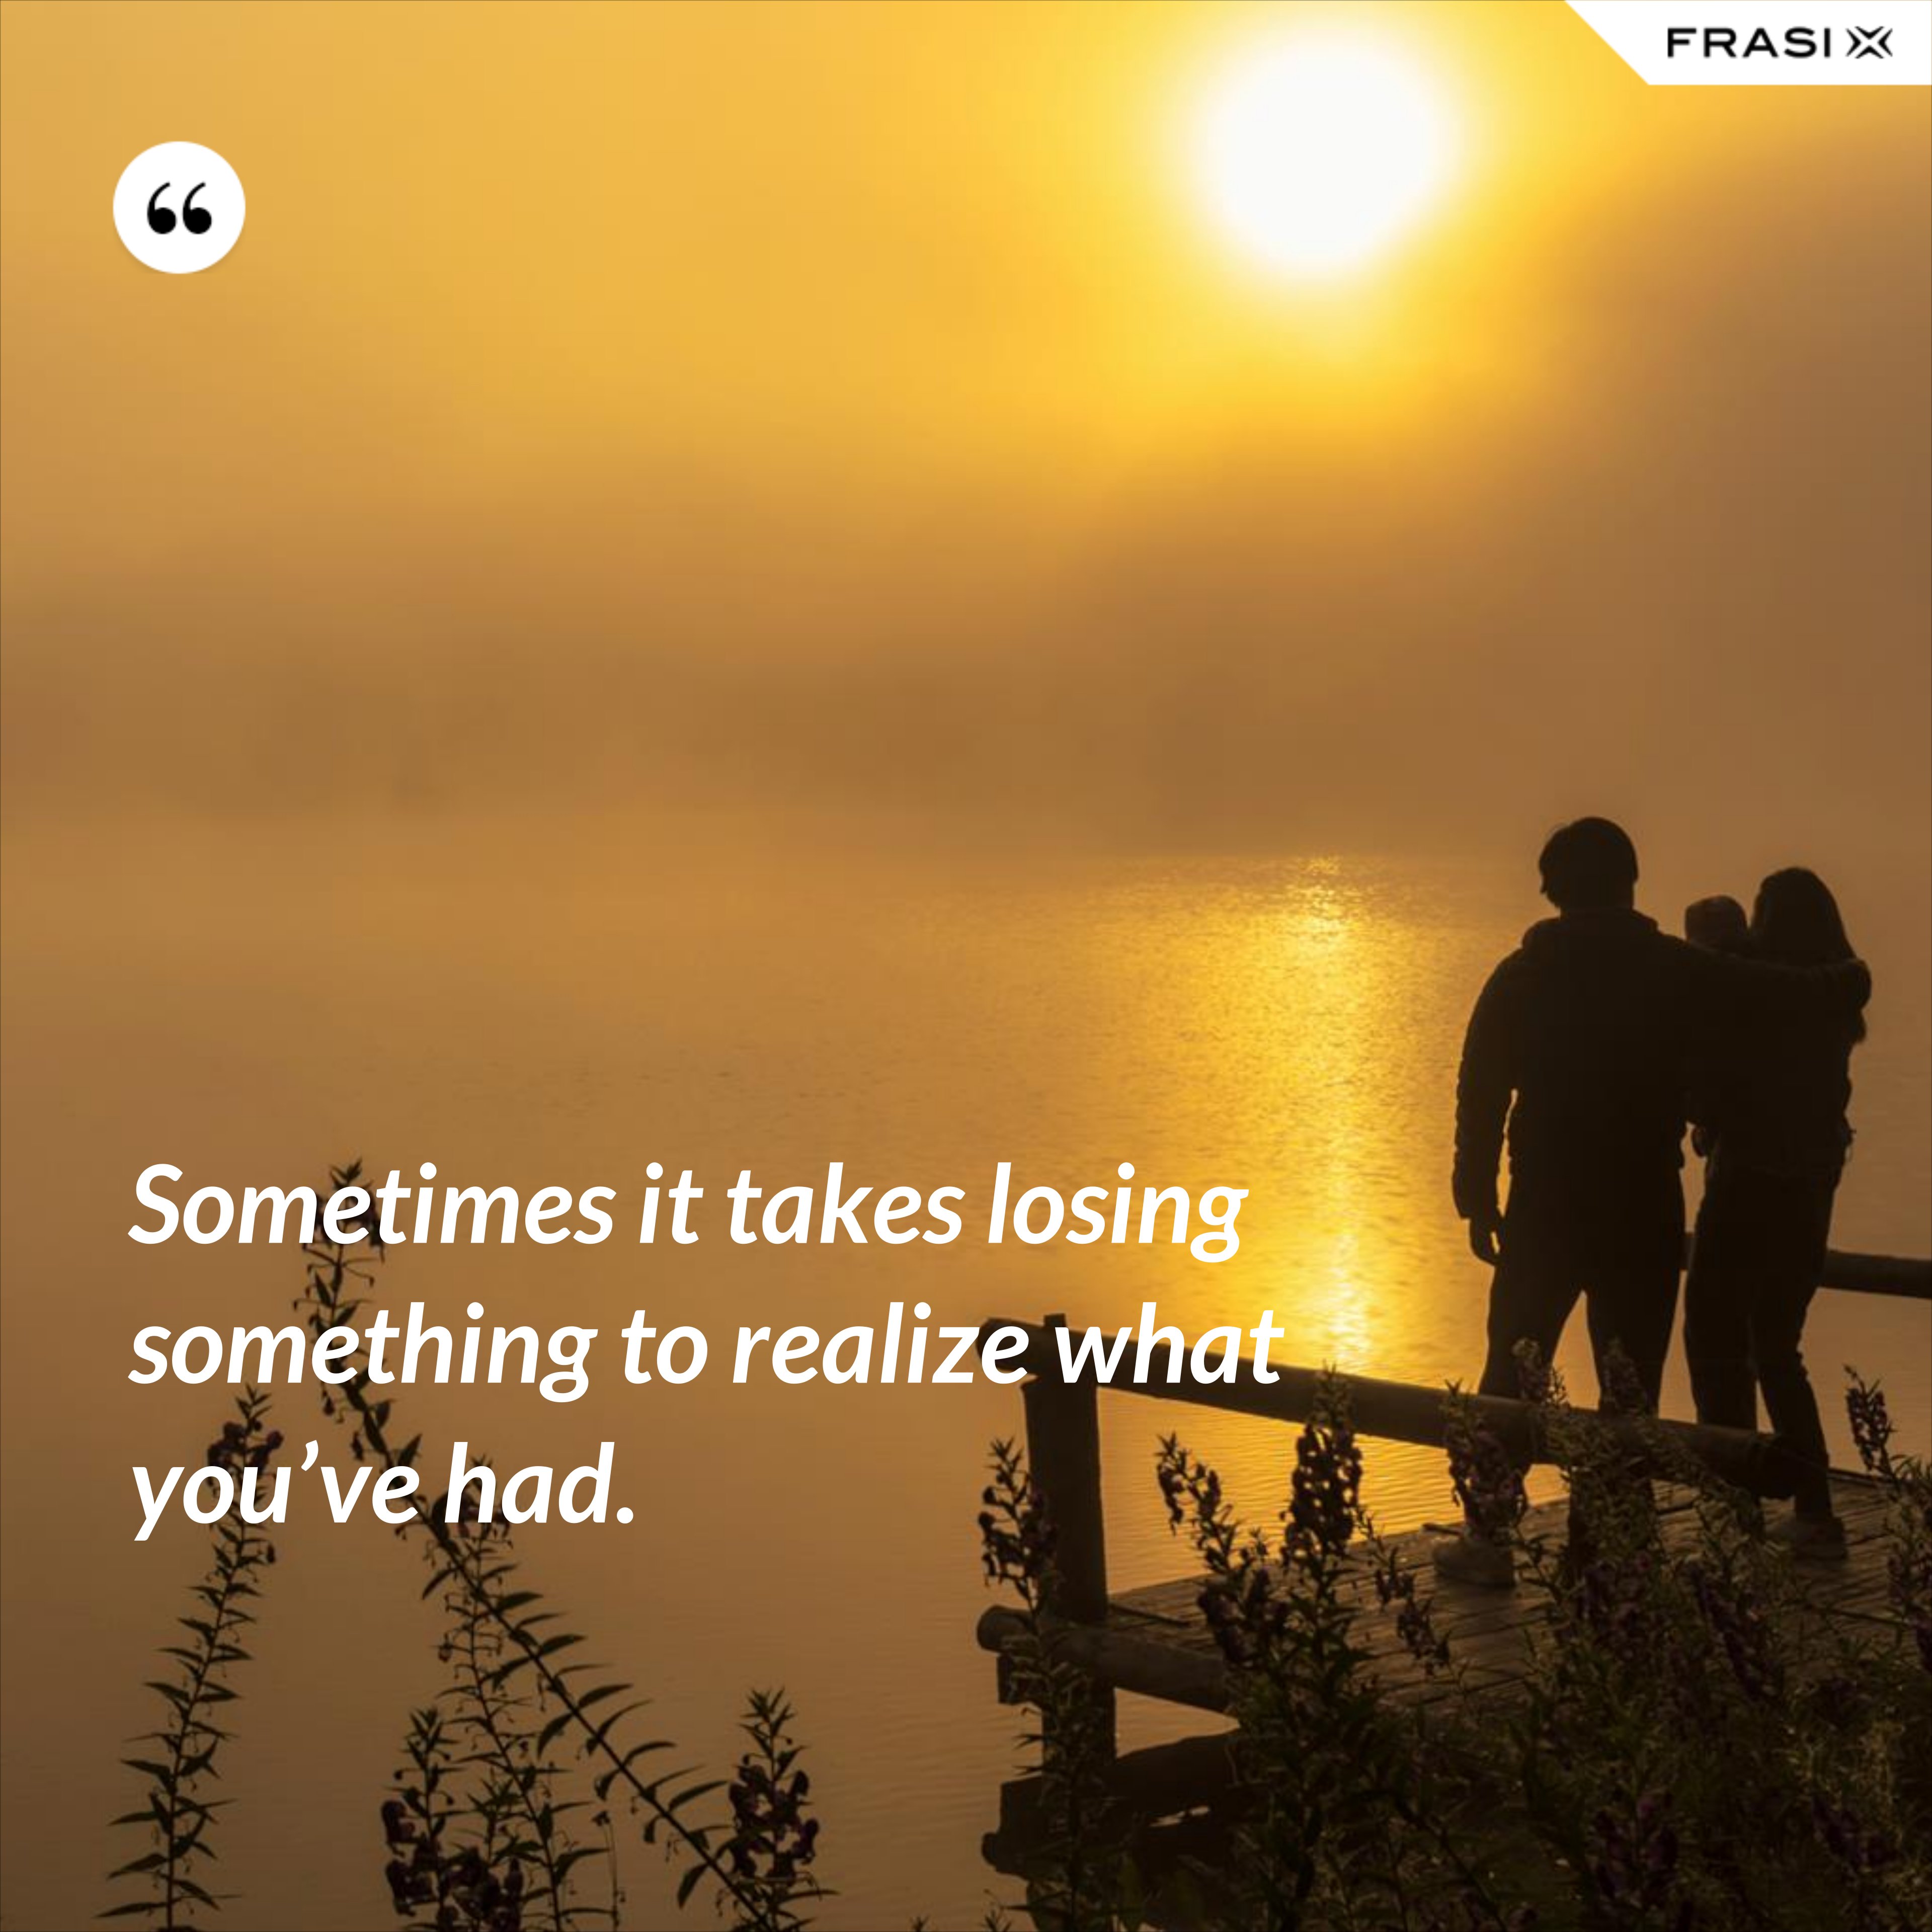 Sometimes it takes losing something to realize what you’ve had. - Anonimo